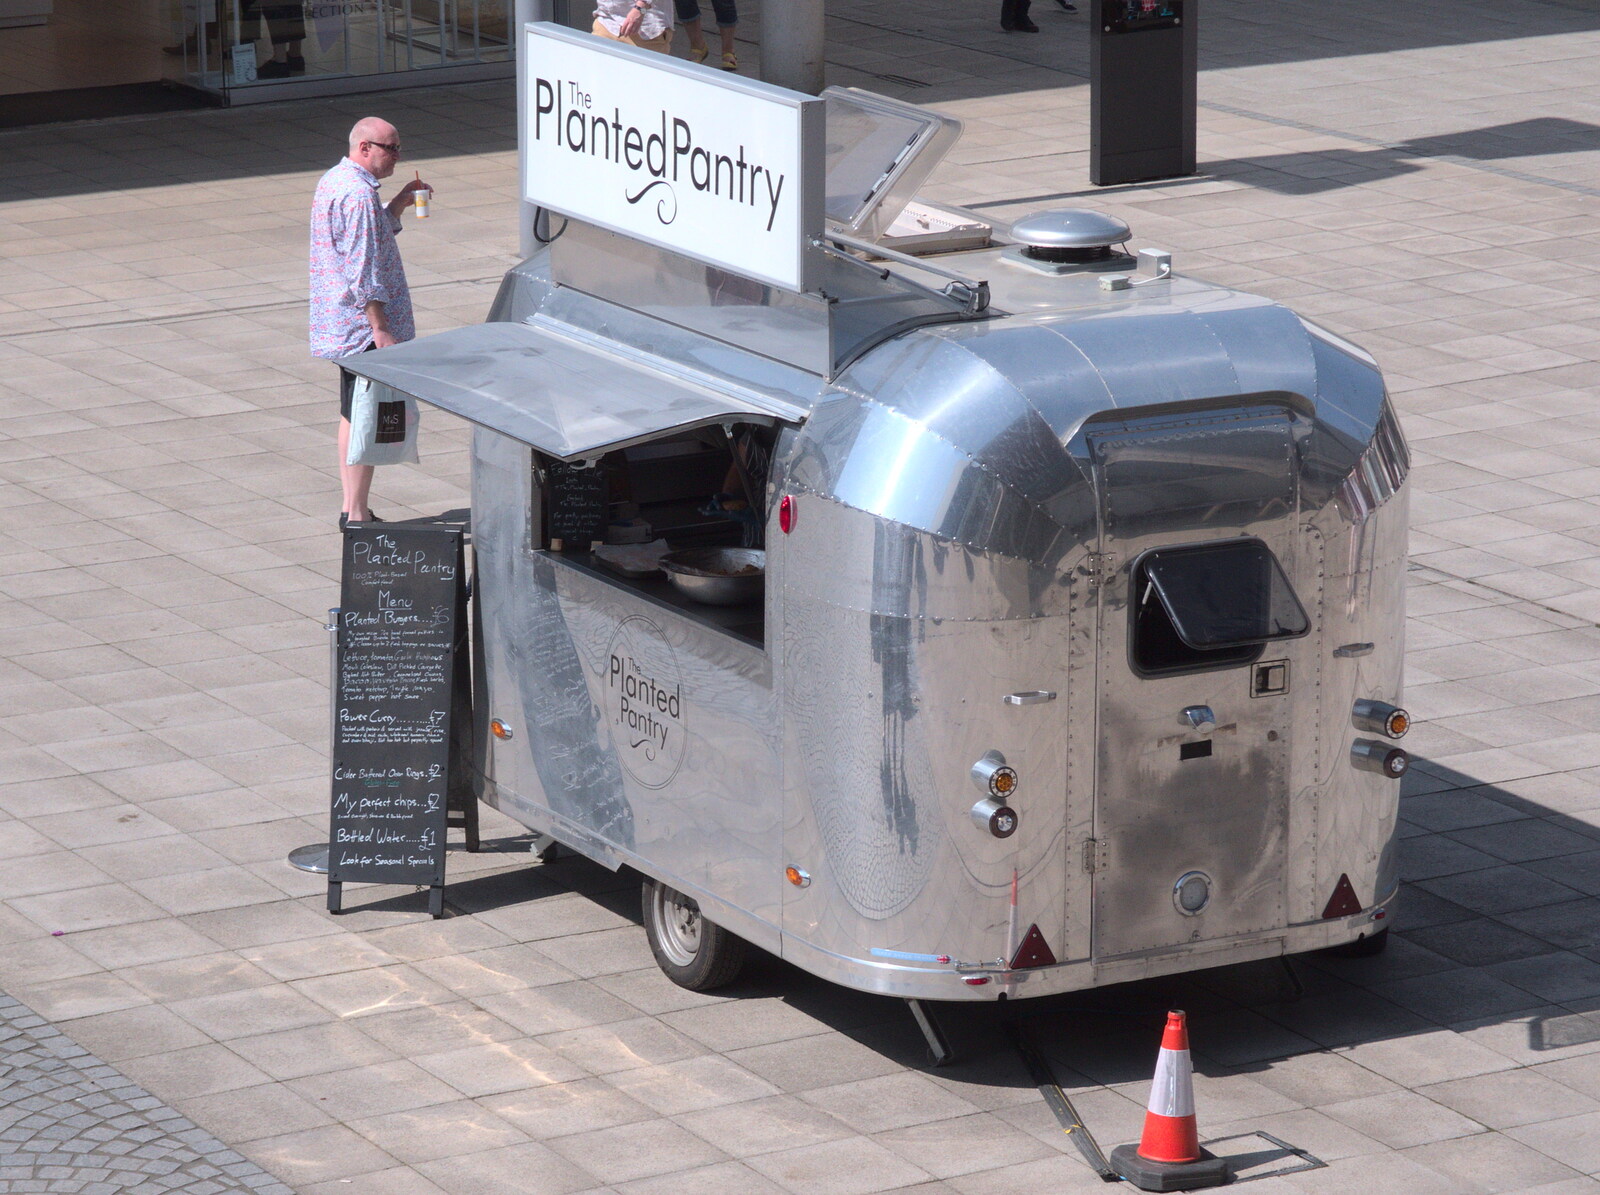 An Airstream-ish caravan from The East Anglian Beer Festival, Bury St. Edmunds, Suffolk - 21st April 2018